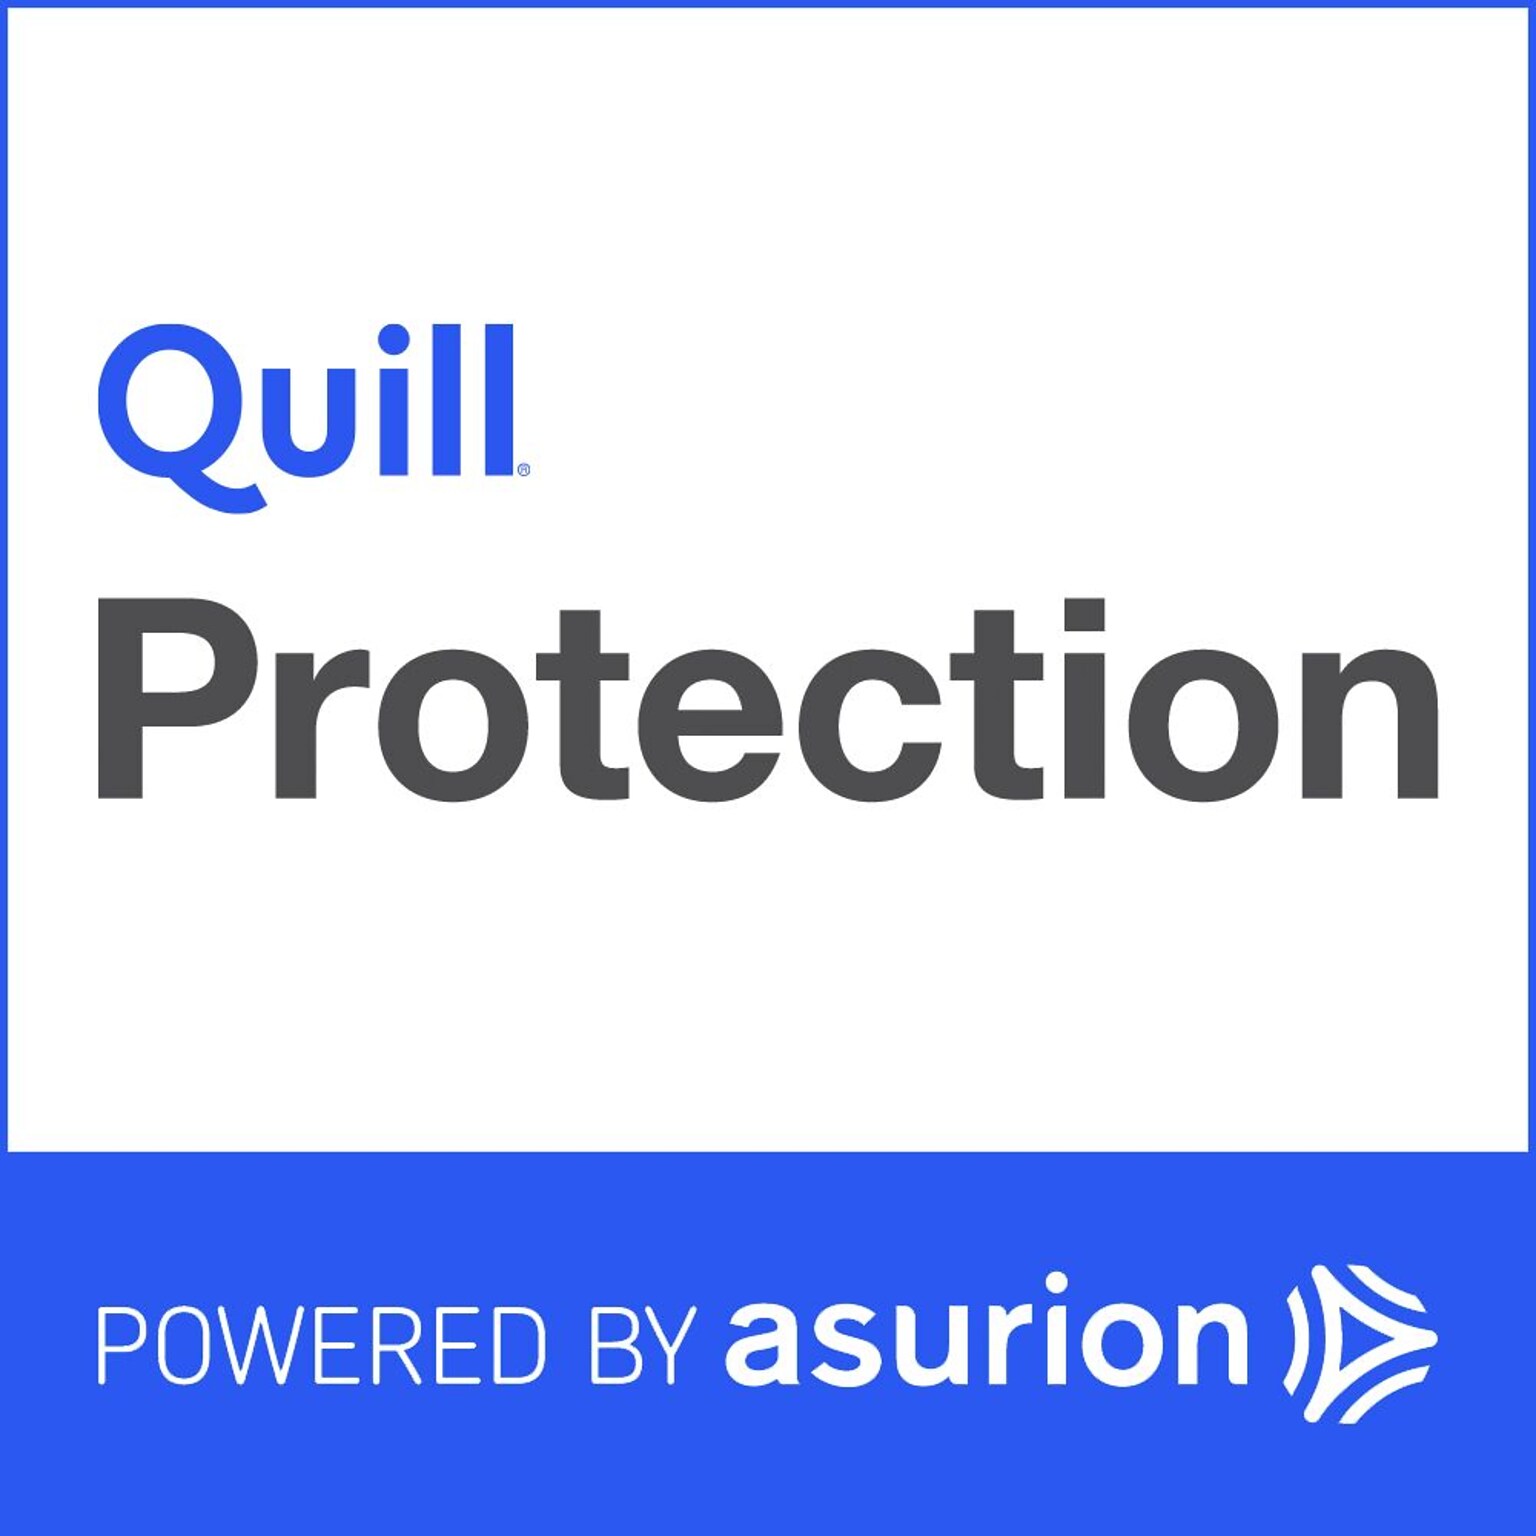 Quill.com 3 Year Furniture Protection Plan $100-$199.99